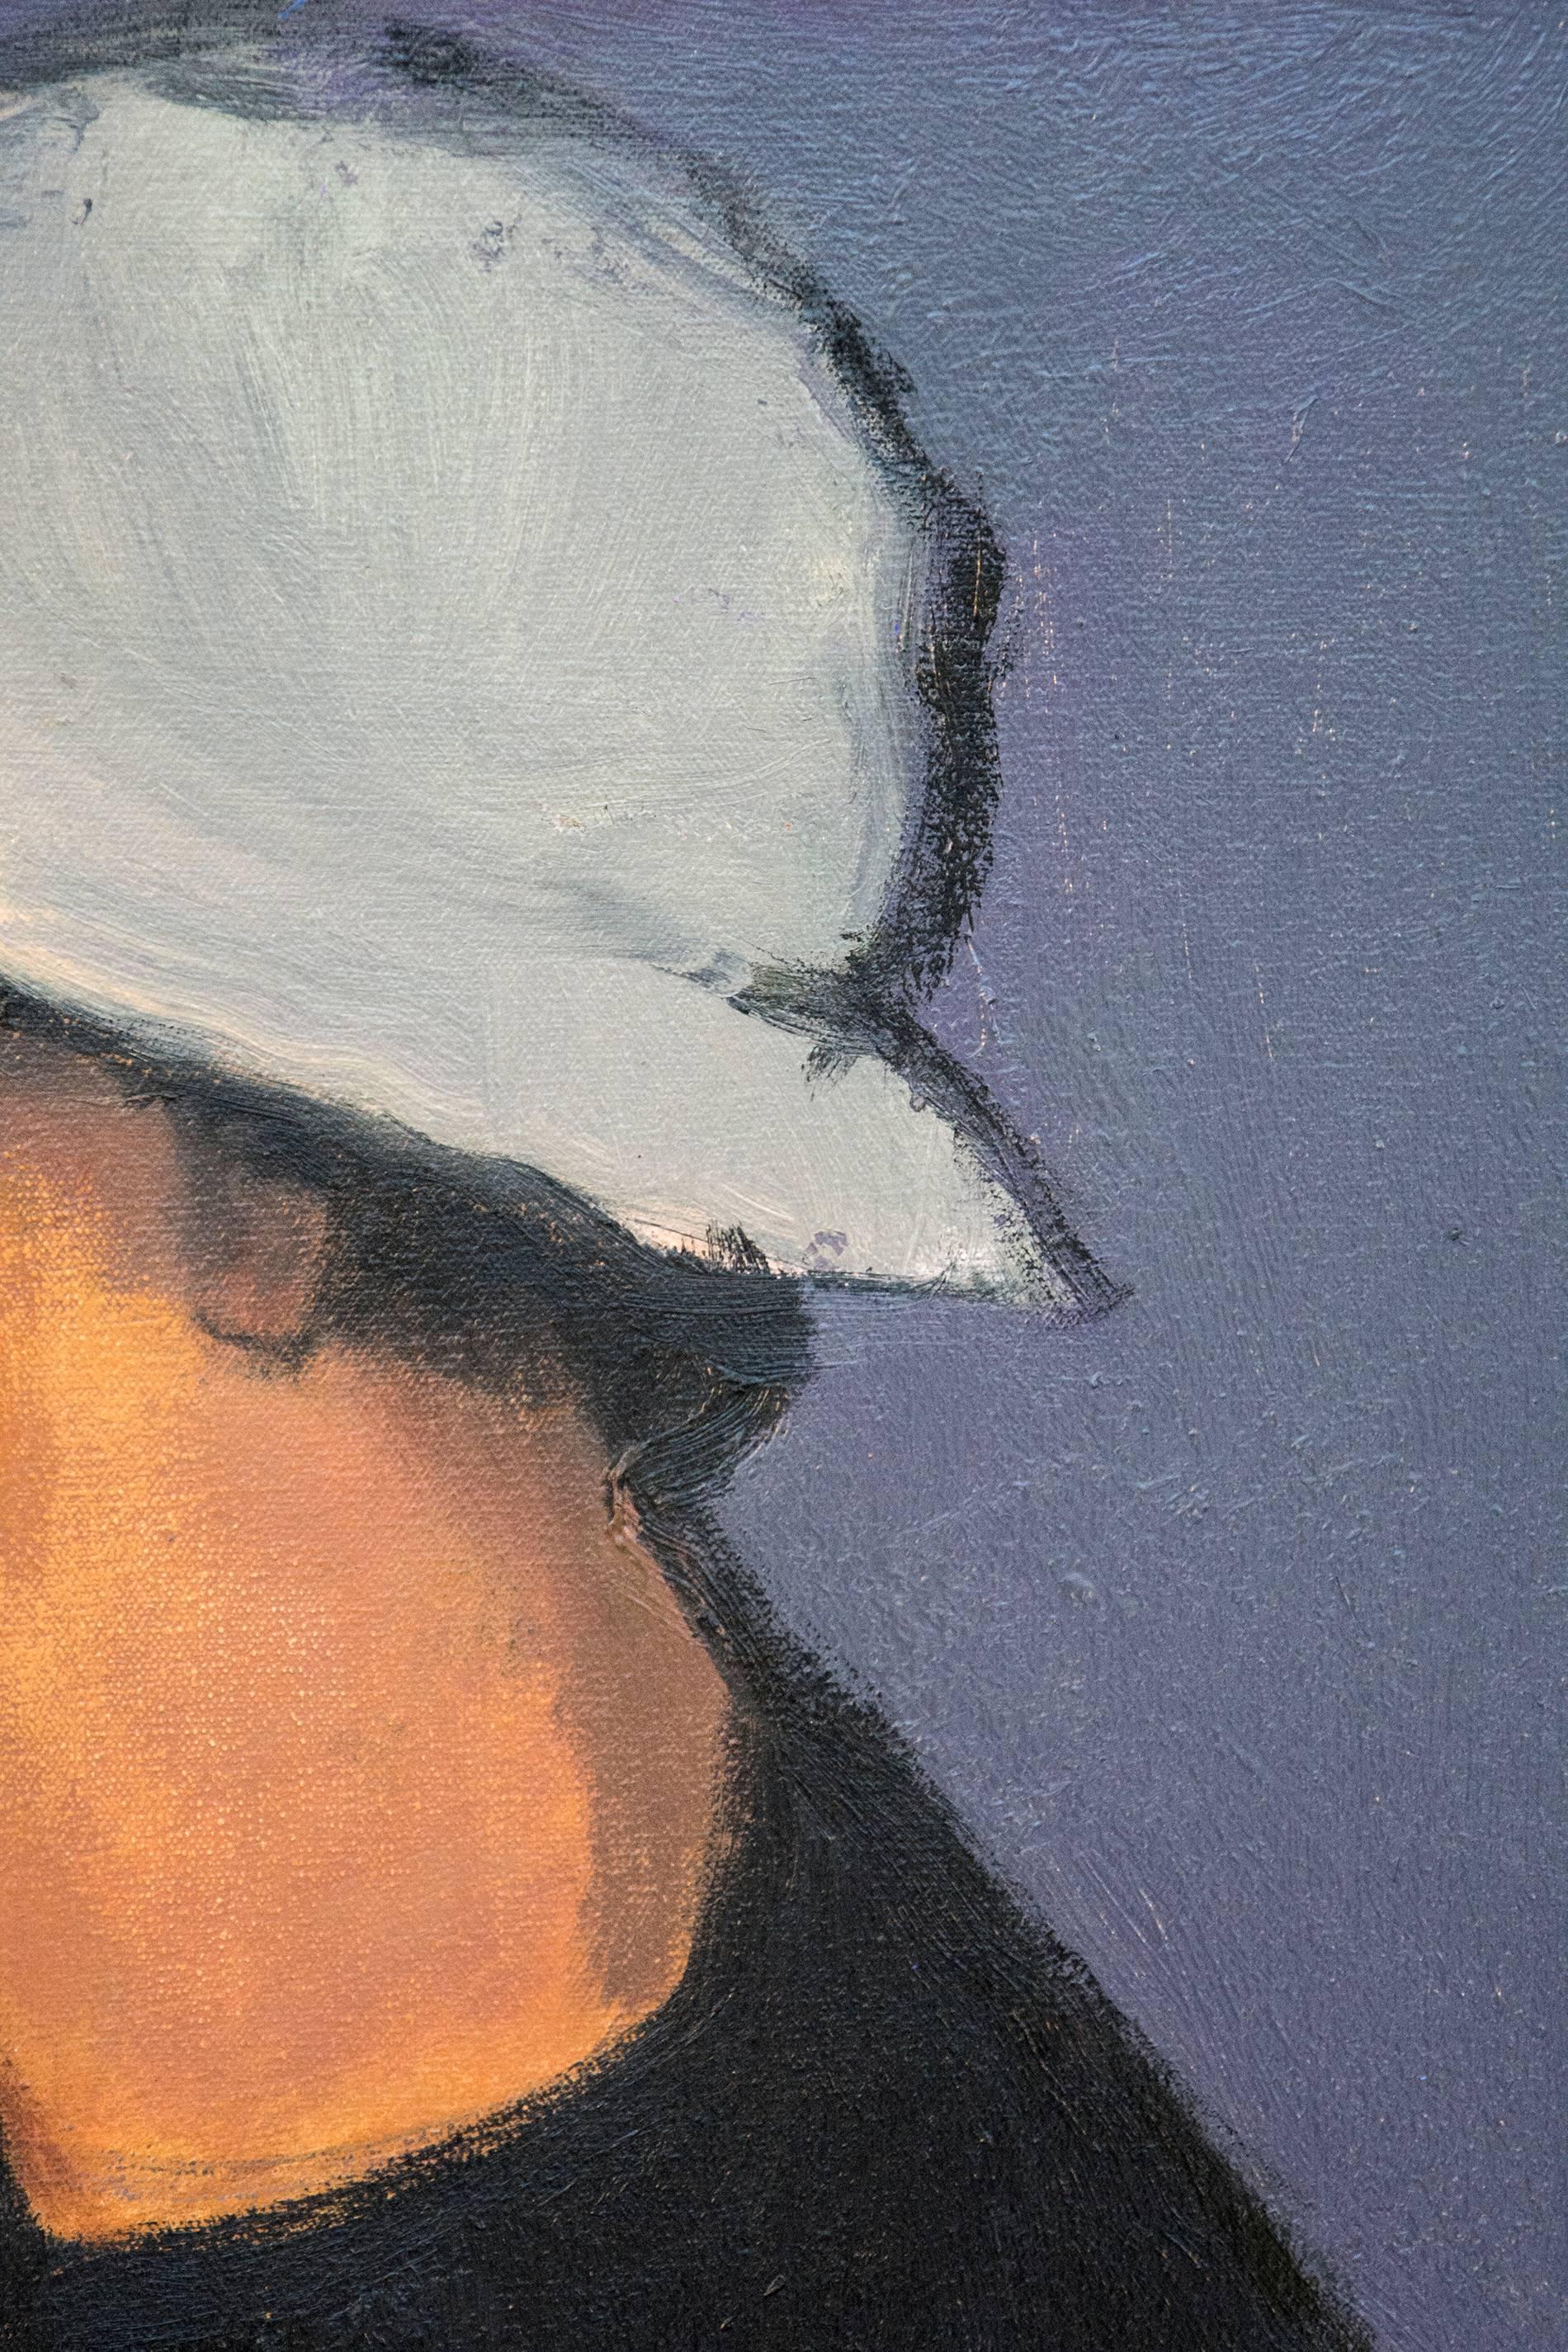 Man with Hat - small blue, white, male portrait figurative still life oil - Black Figurative Painting by Jennifer Hornyak